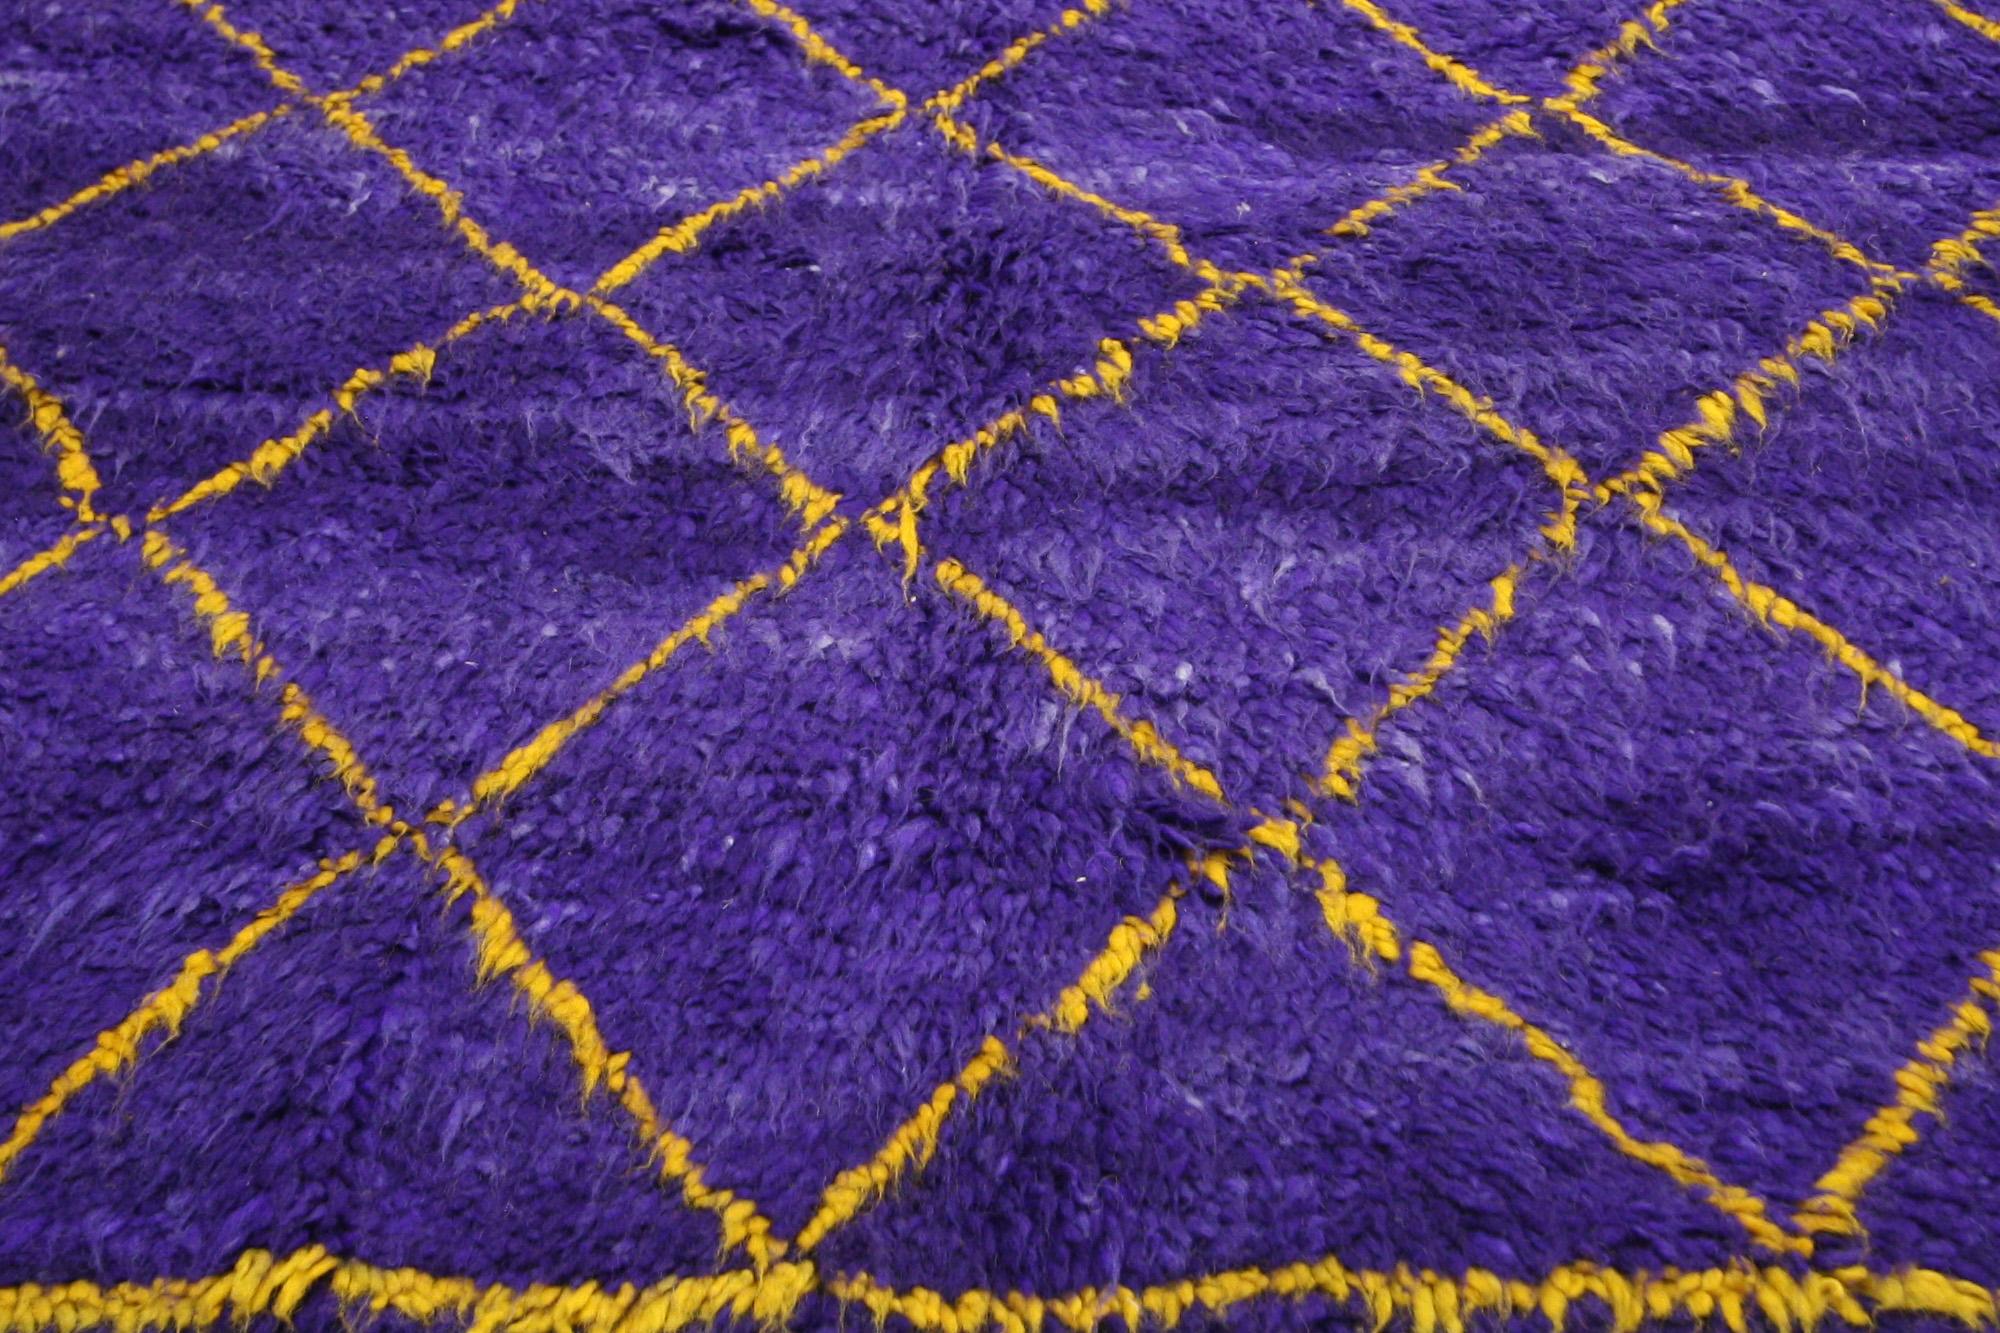 Hand-Knotted Vintage Purple Moroccan Beni Ourain Rug, Midcentury Modern Meets Boho Chic For Sale